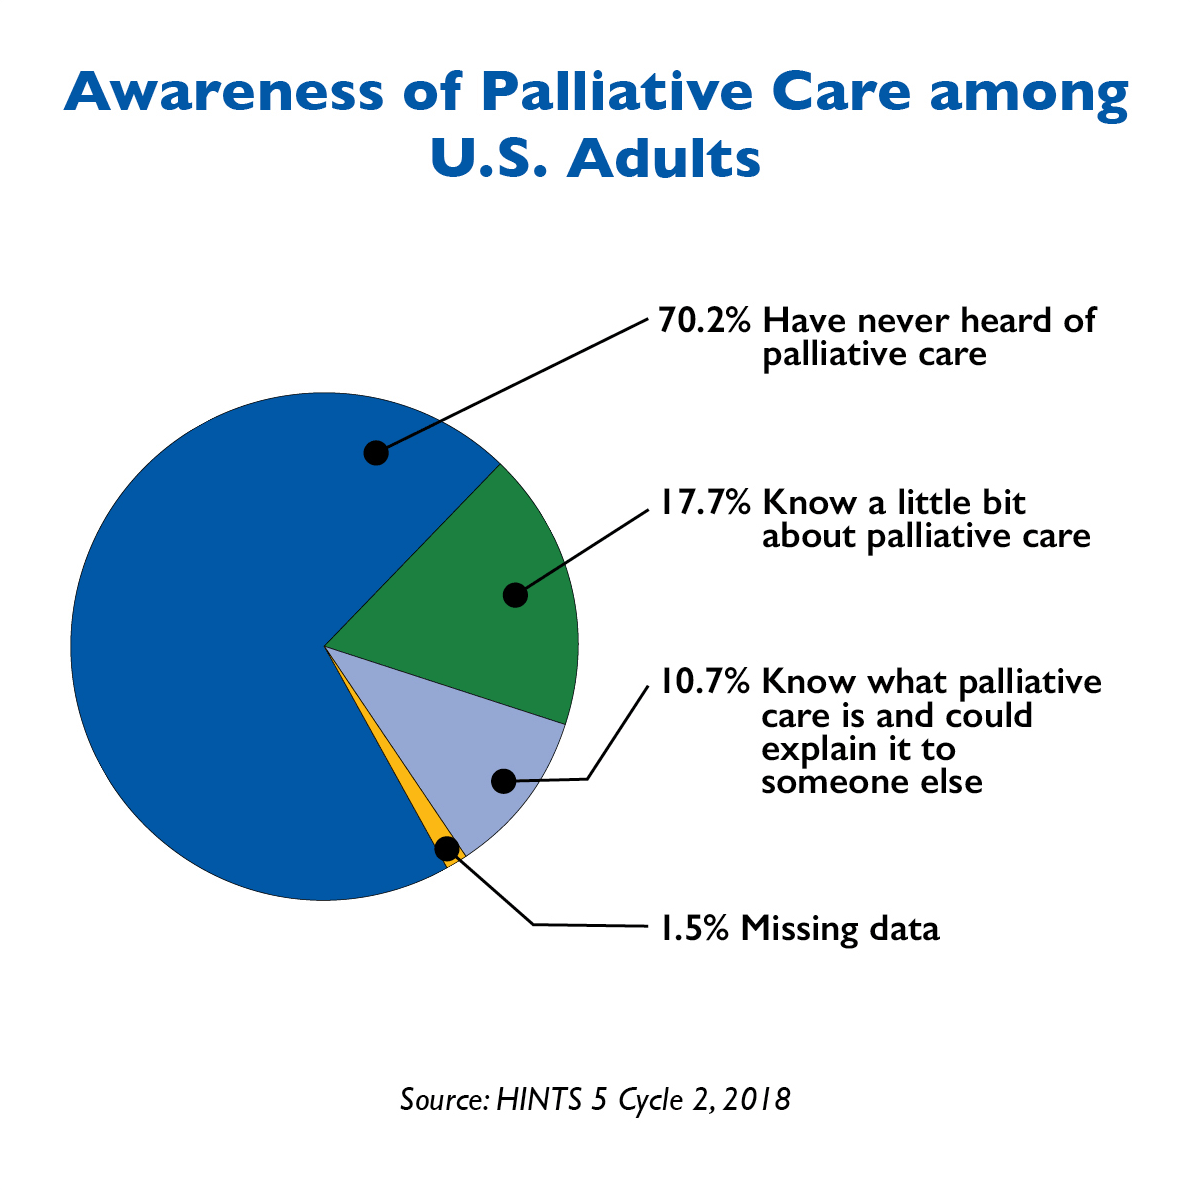 Awareness of Palliative Care among U.S. adults. 70.2 percent have never heard of pallative care. 17.7 percent knwo a little bit about pallative care. 10.7 percent know what palliative care is and could explain it to someone elese. 1.5 percent missing data.